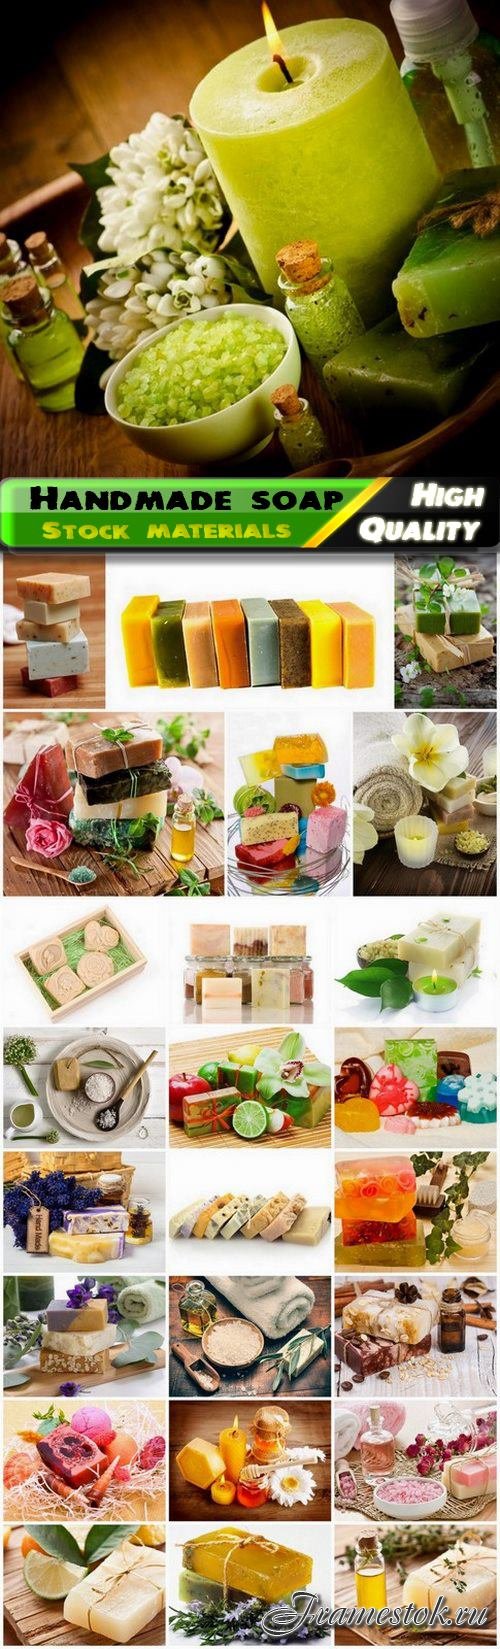 Spa products and creative colored handmade soap - 25 HQ Jpg